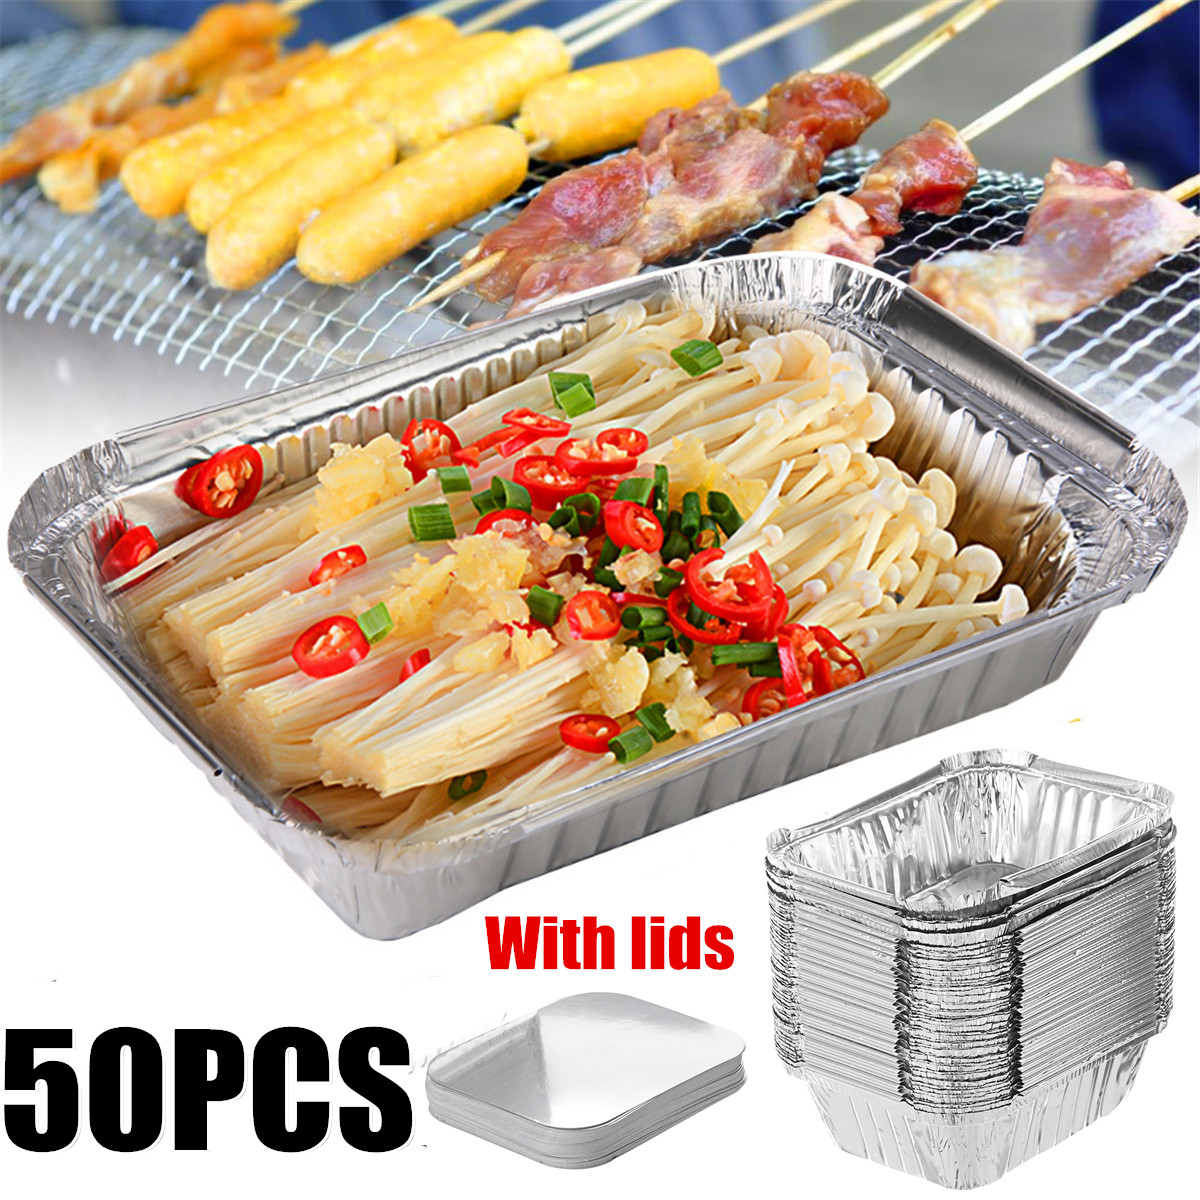 50PCS-Aluminum-Foil-Trays-BBQ-Disposable-BBQ-Mat-Food-Container-Baking-Pan-With-Lids-1615311-1